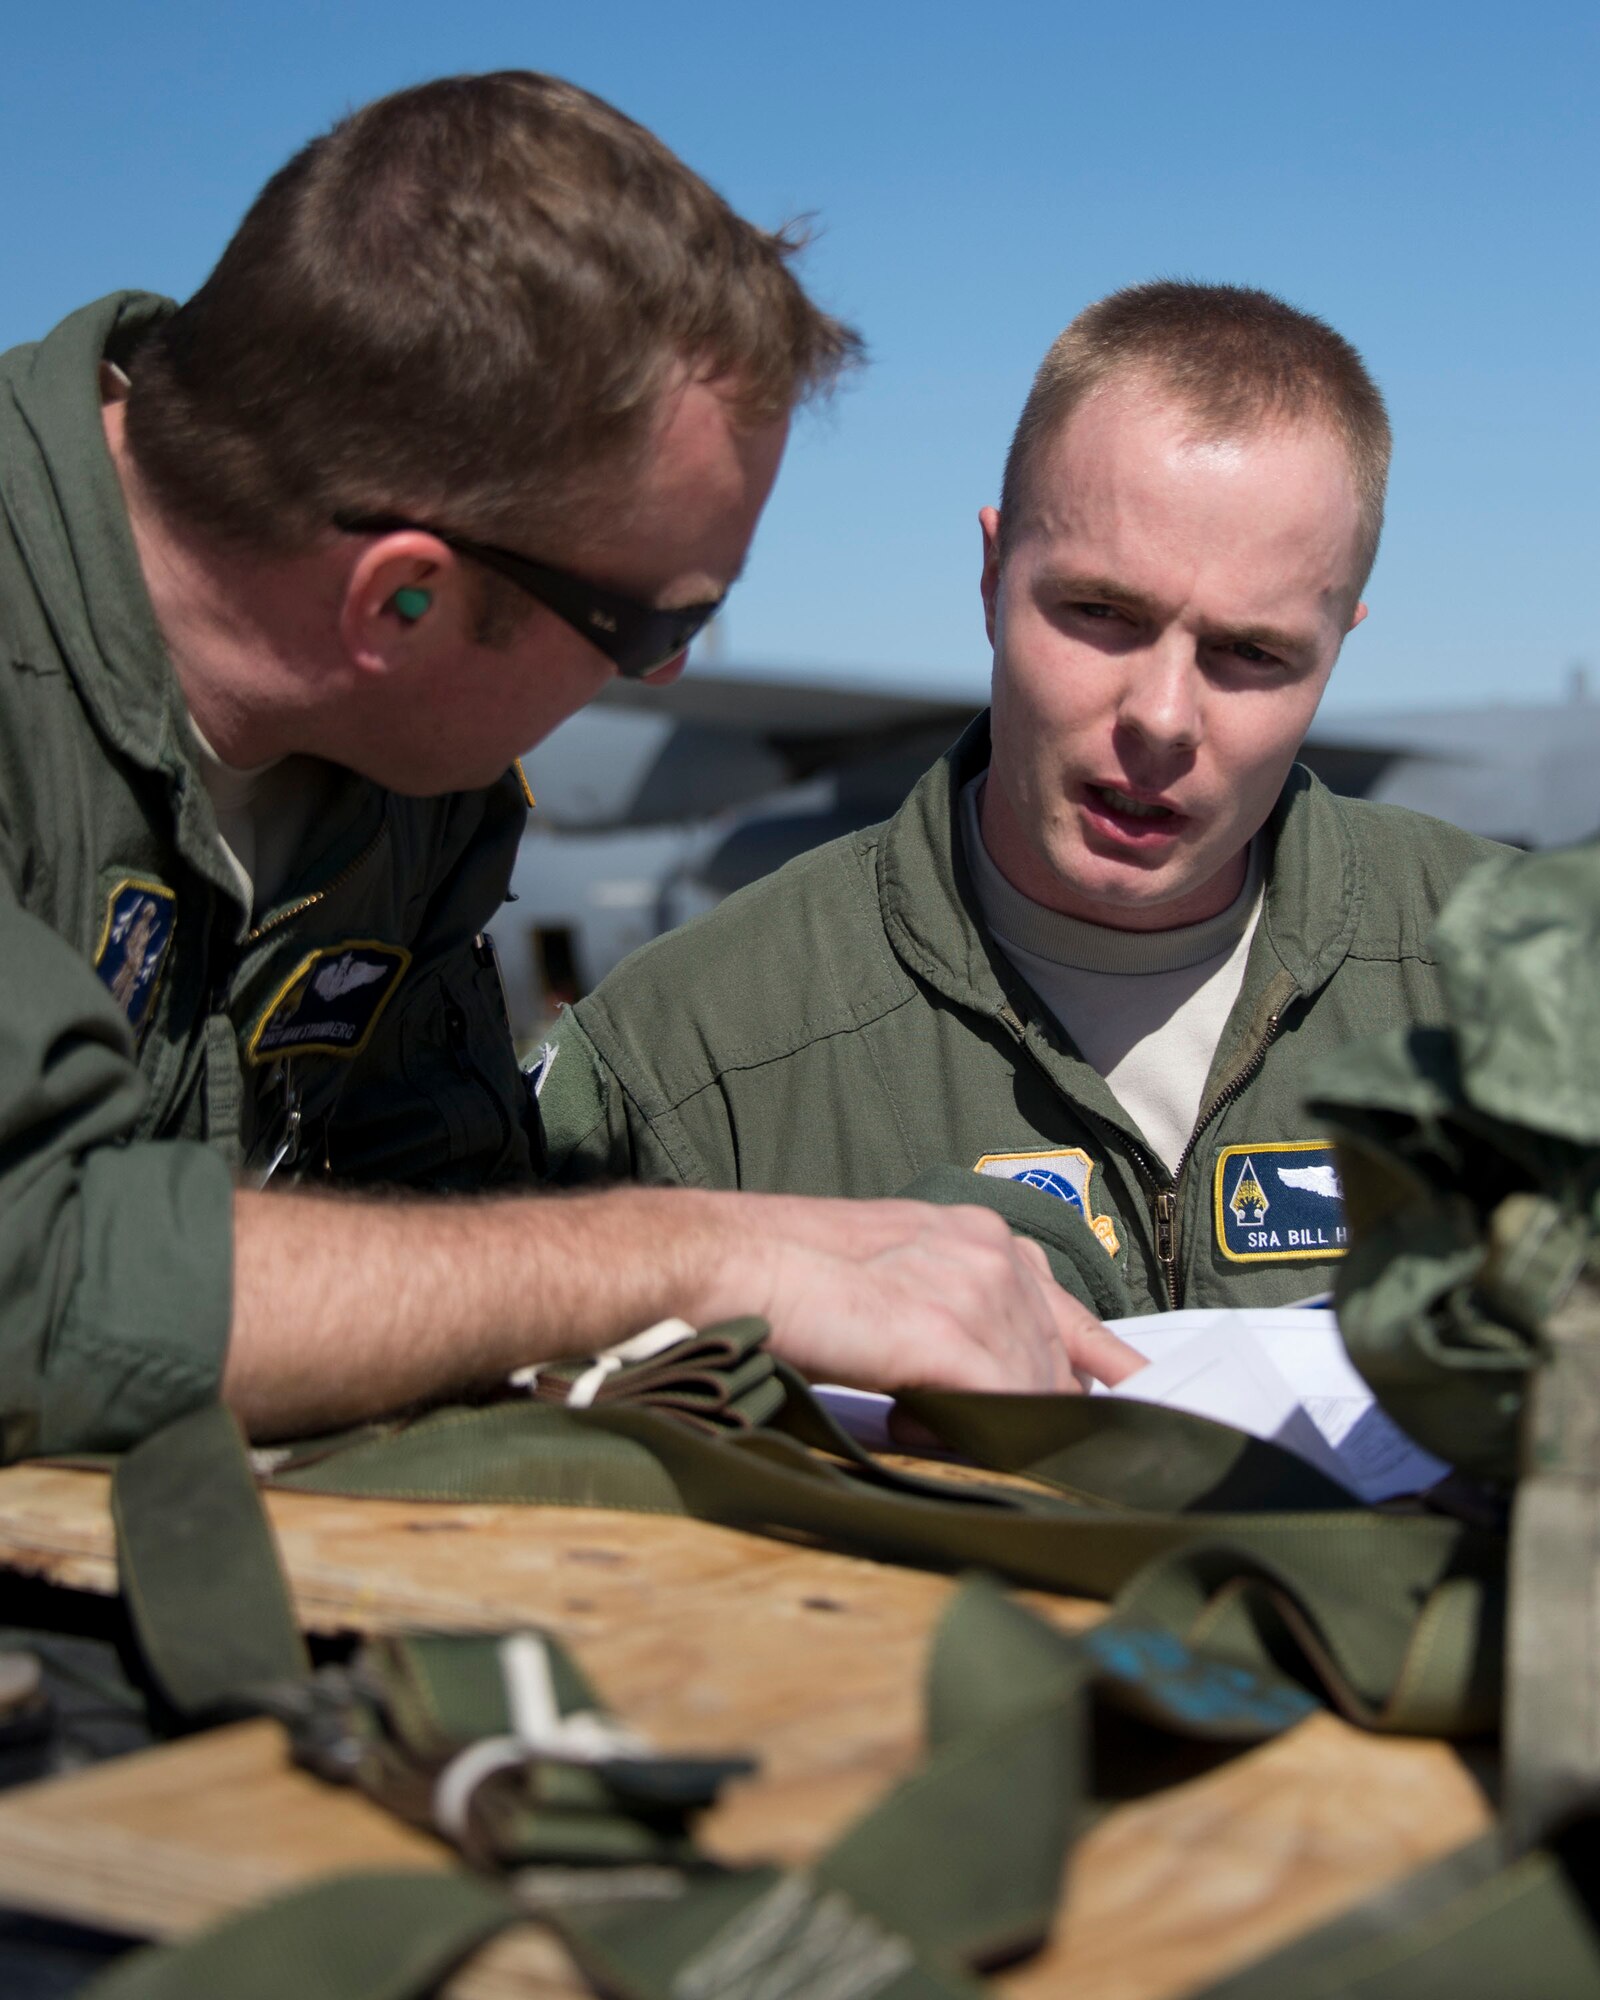 Master Sgt. Aran Stromberg, left, inspects the load plan with Senior Airman Bill Hanson, both from the 109th Airlift Squadron, in Yuma, Ariz., Feb. 26, 2014. The flight was a check-ride mission for Hanson, during which he was evaluated on his skills as a loadmaster.
(U.S. Air National photo by Tech. Sgt. Amy M. Lovgren/ Released)
